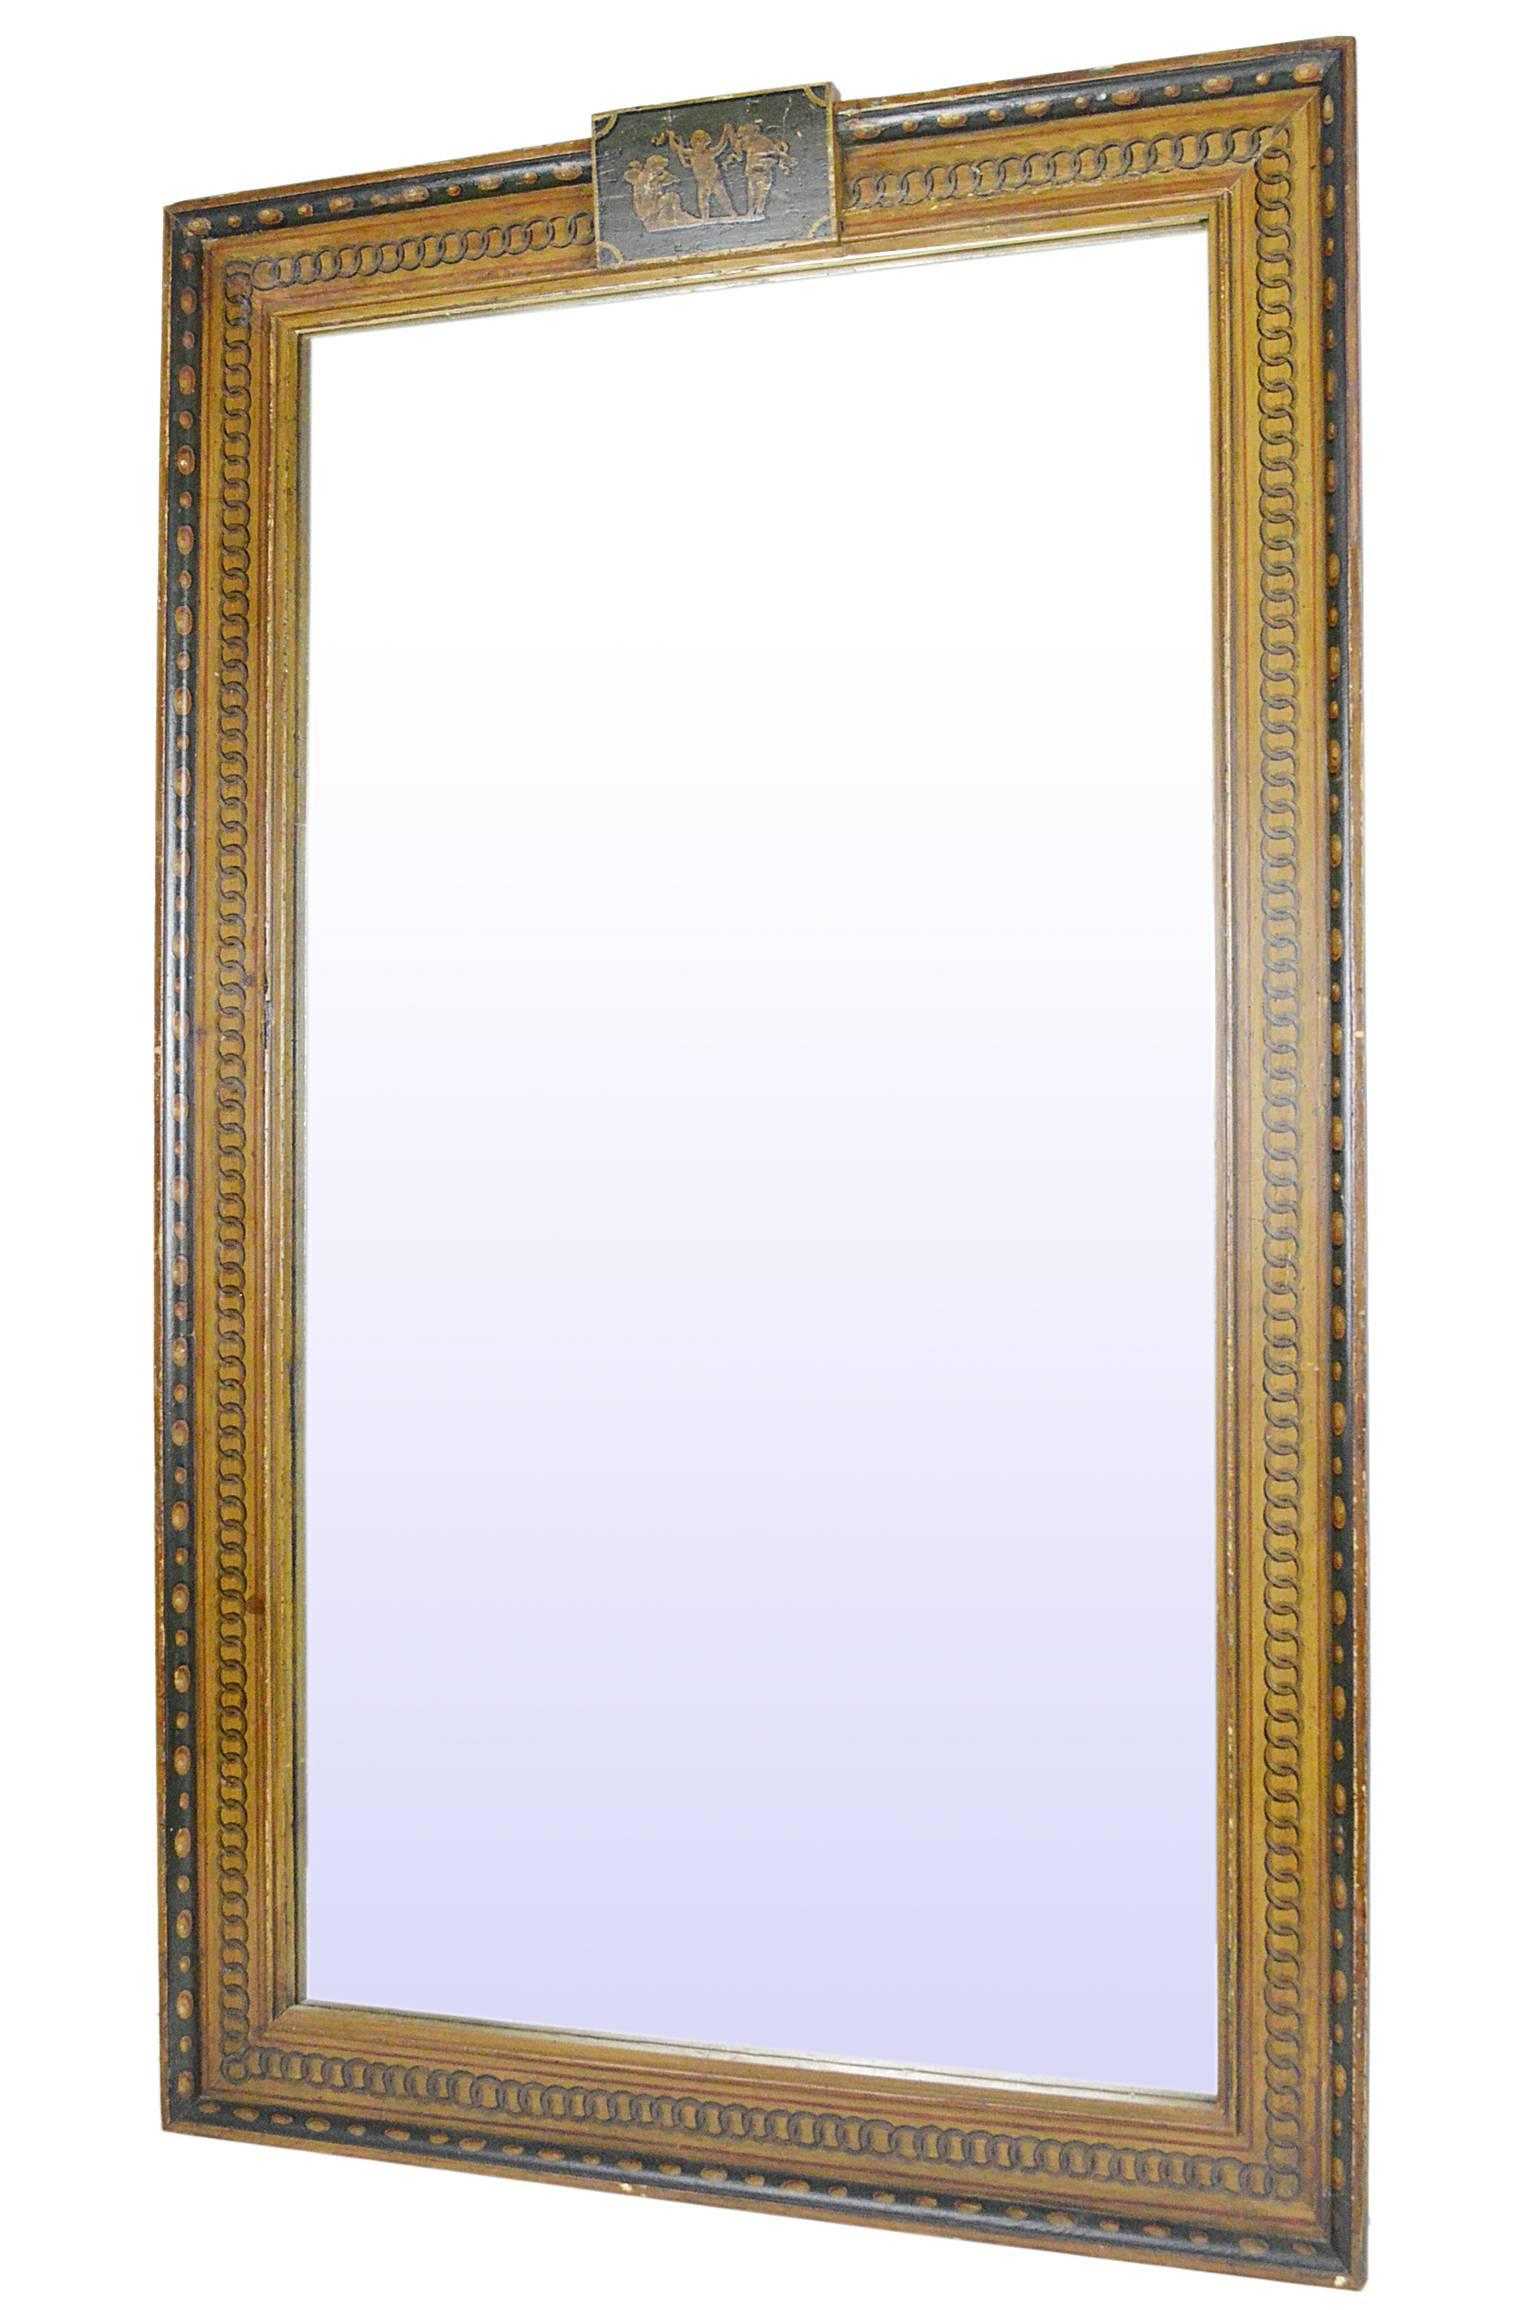 19th century large-scale Italian neoclassical style painted mirror.